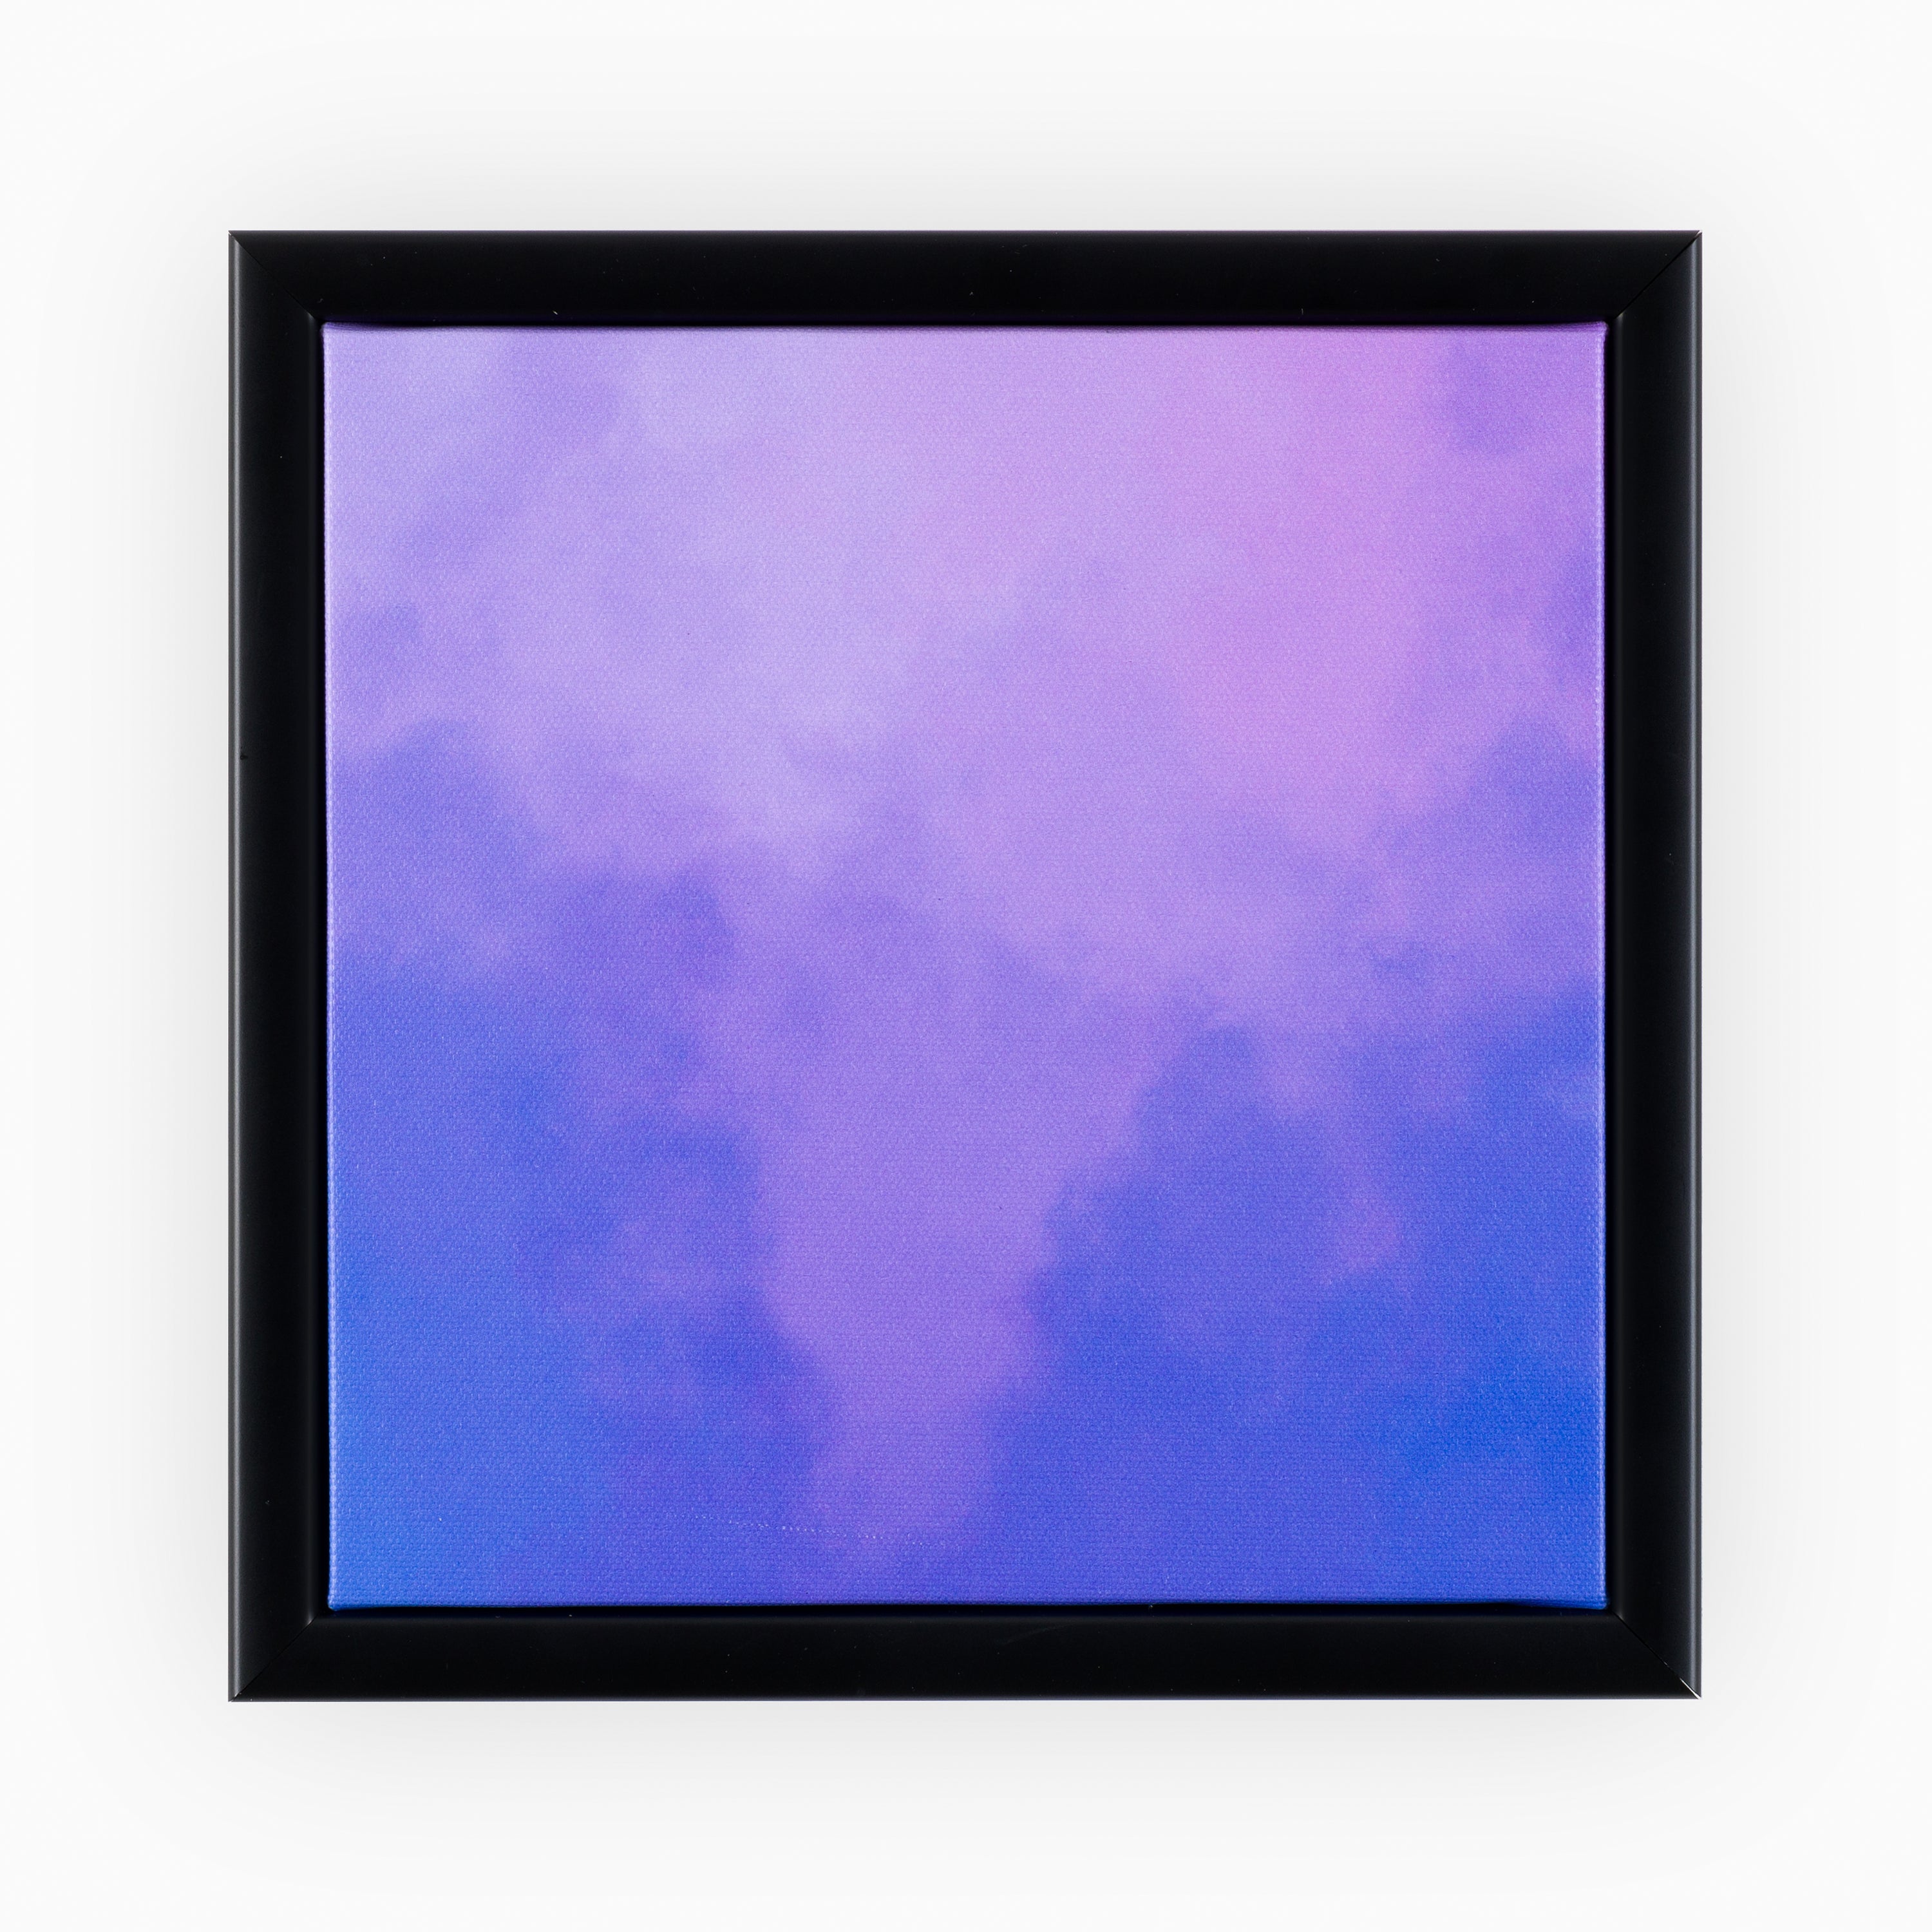 Luxurious canvas encased in a sophisticated black frame, featuring a smooth lavender, purple to royal blue gradient, creating a calming swirl effect that exudes modern elegance.